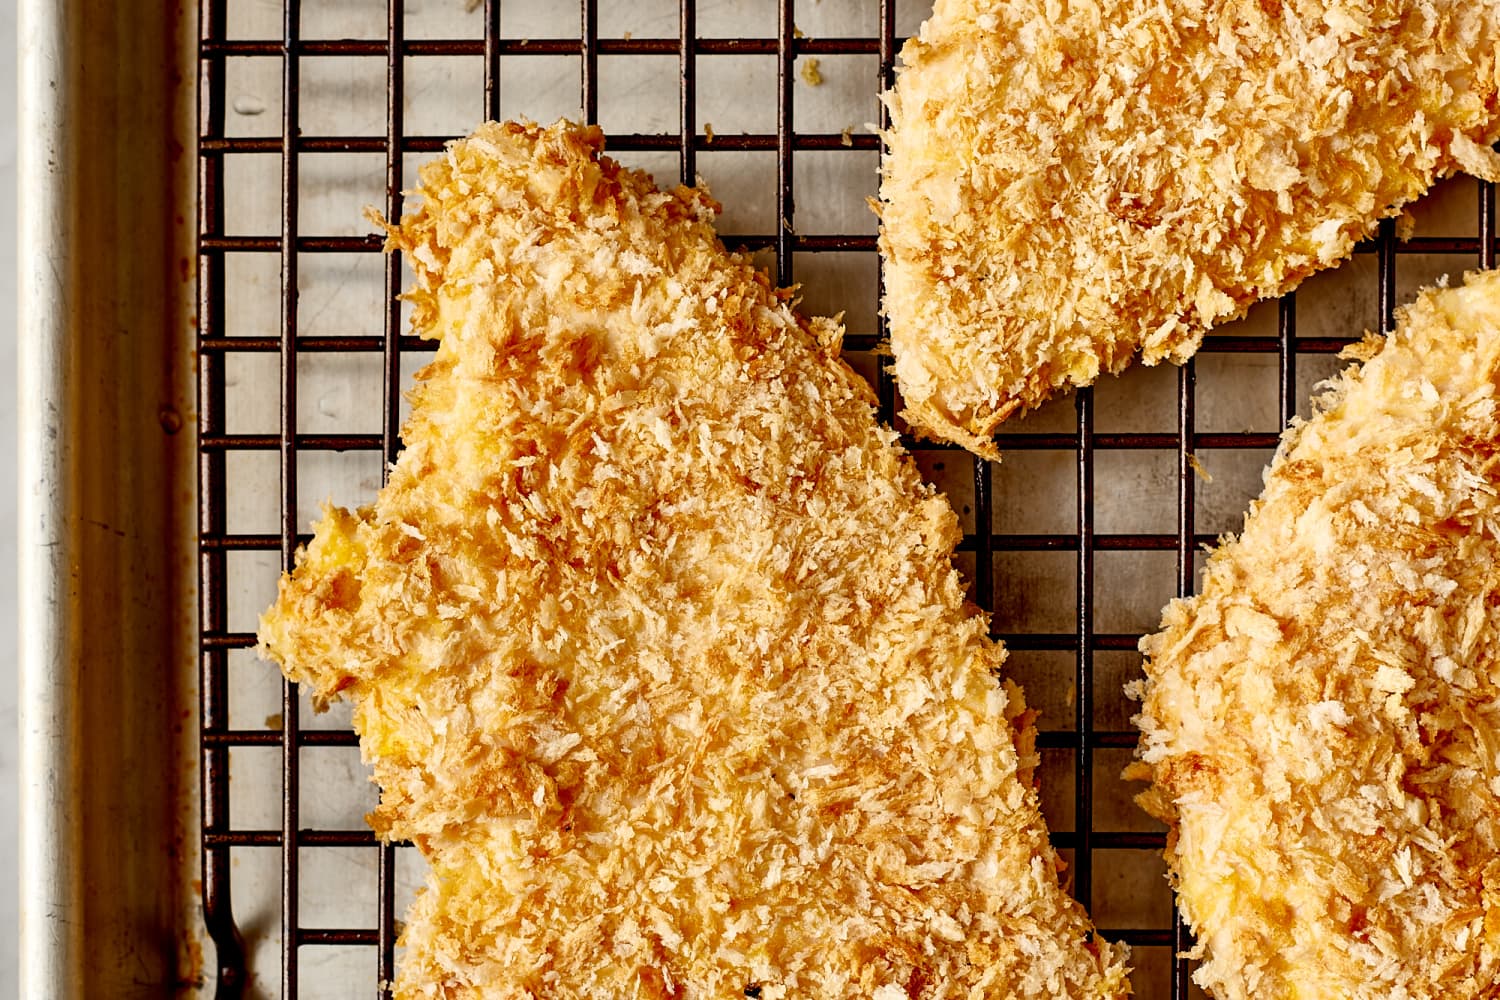 How To Bake Crispy, Juicy Chicken in the Oven - The Kitchn